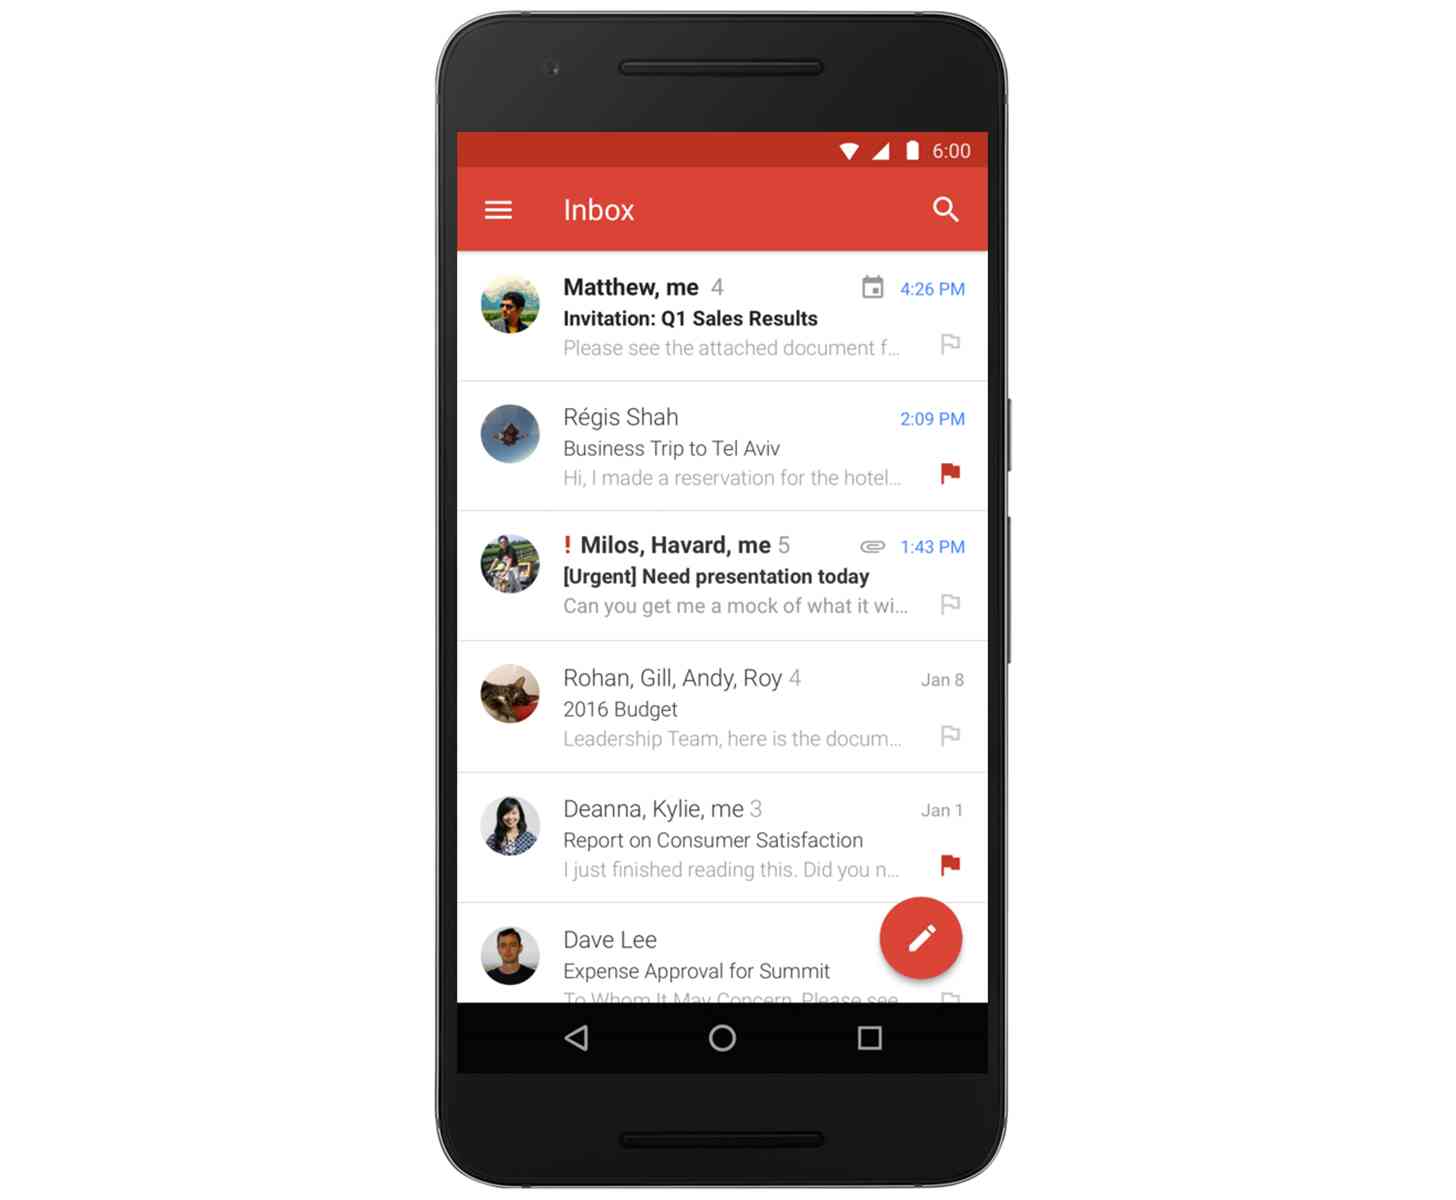 Gmail app for Android Microsoft Exchange support